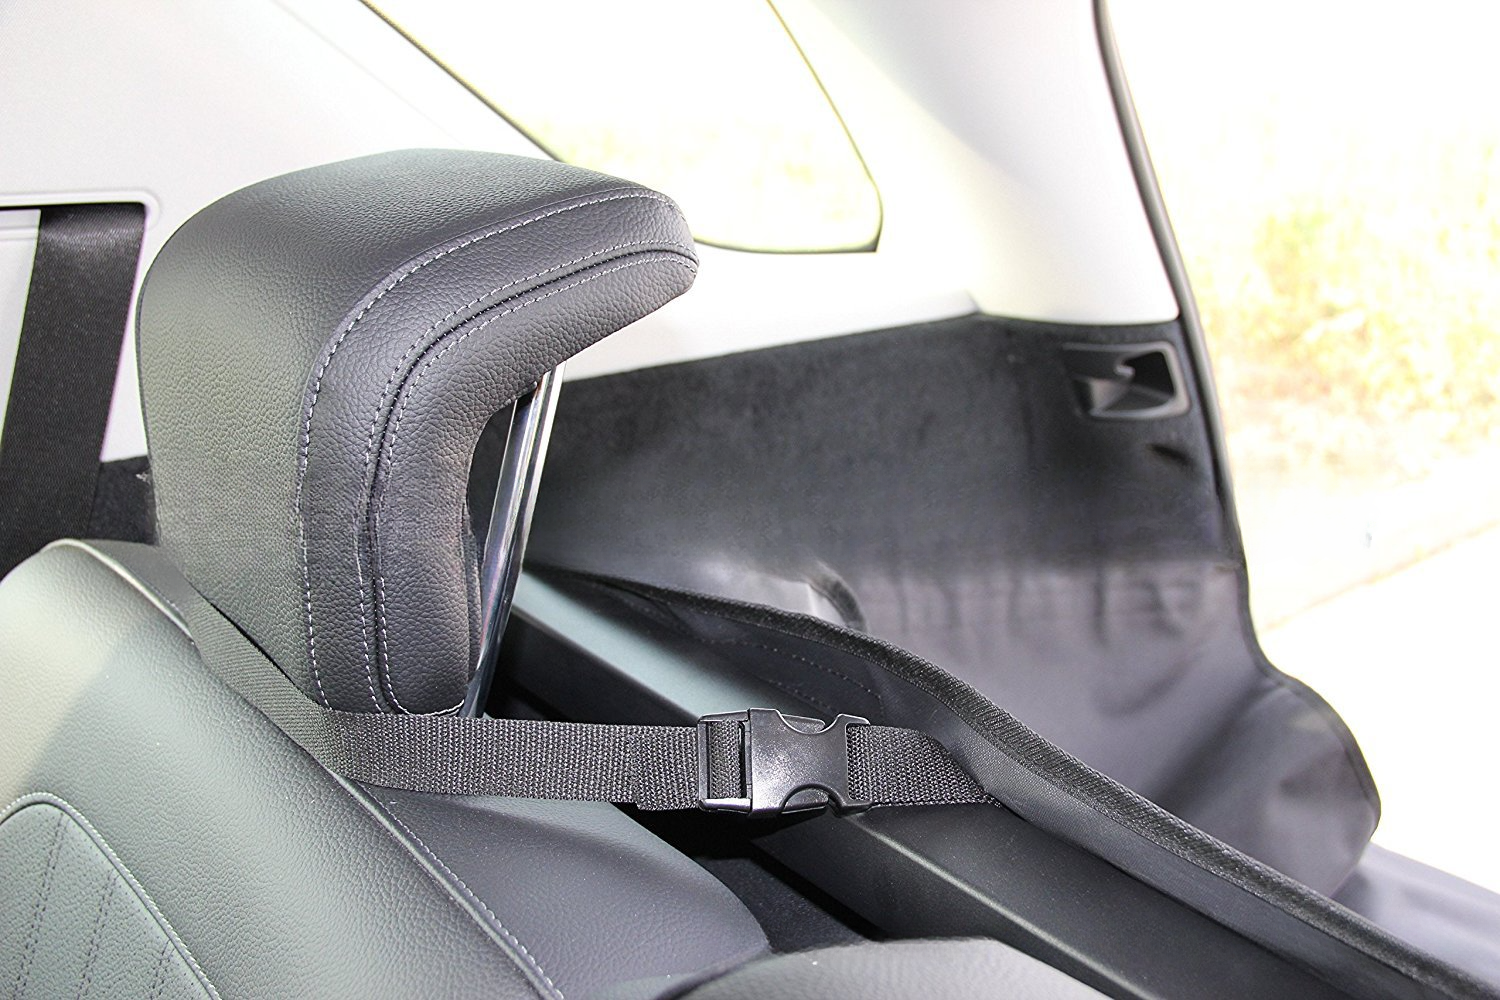 Easy Transport Car Seat Cover - hugostreats